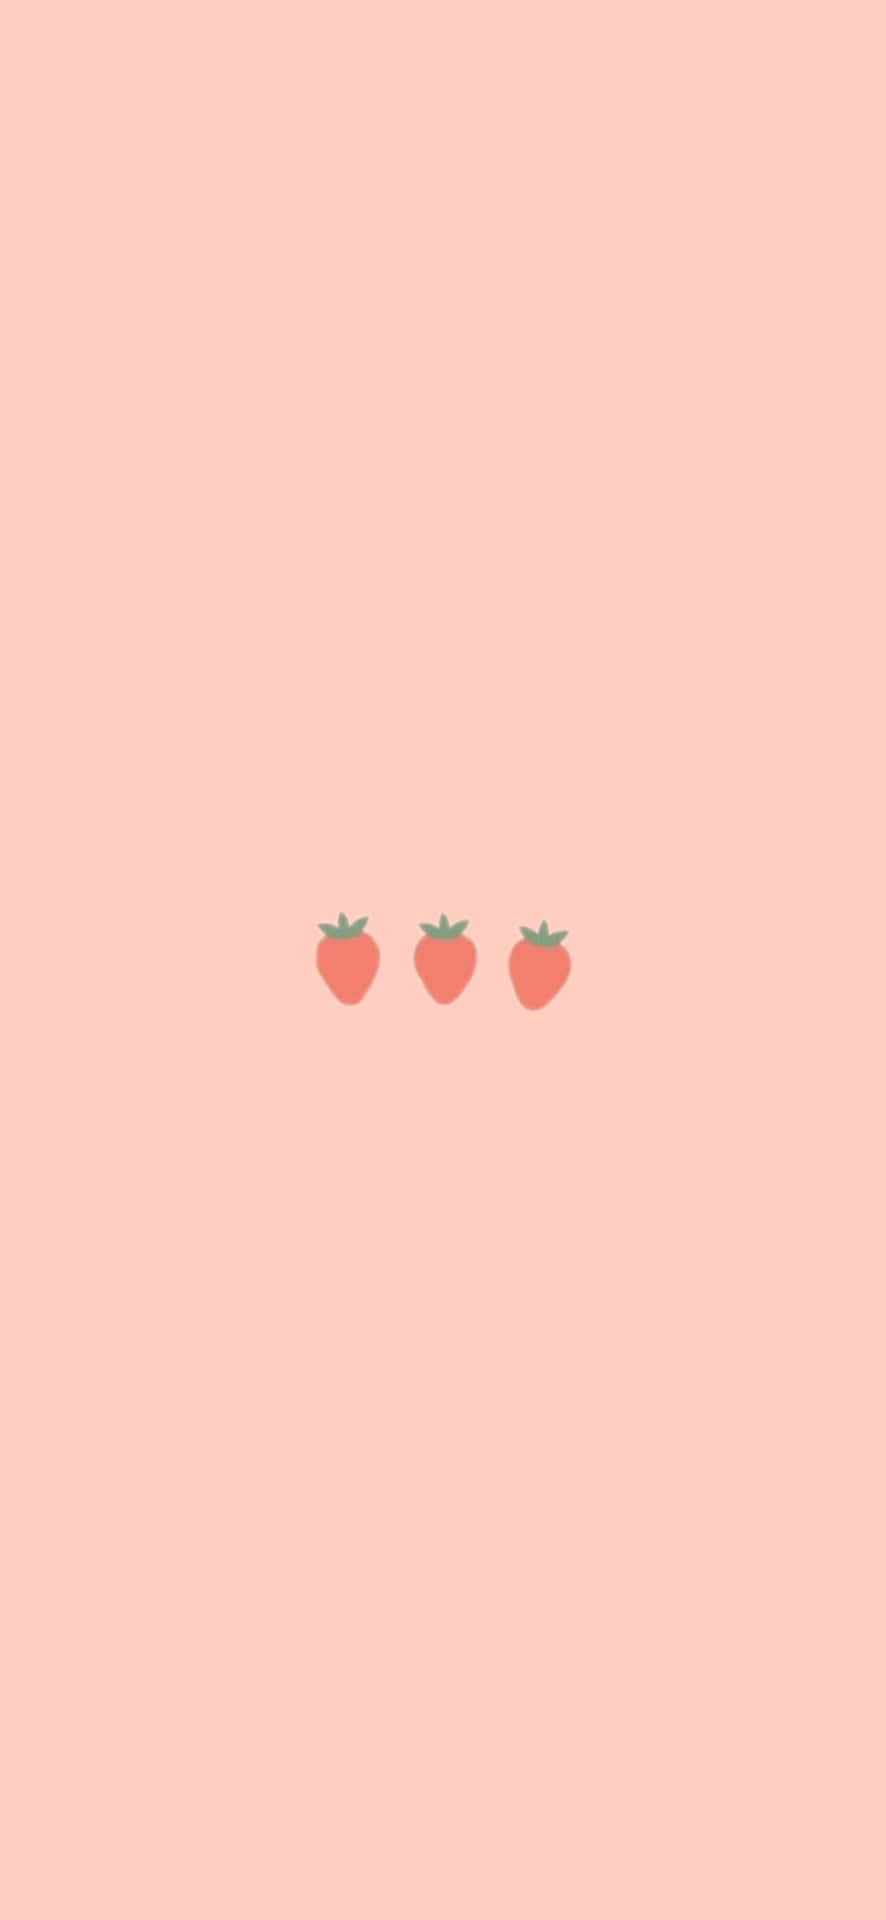 A Pink Background With Three Tomatoes On It Wallpaper